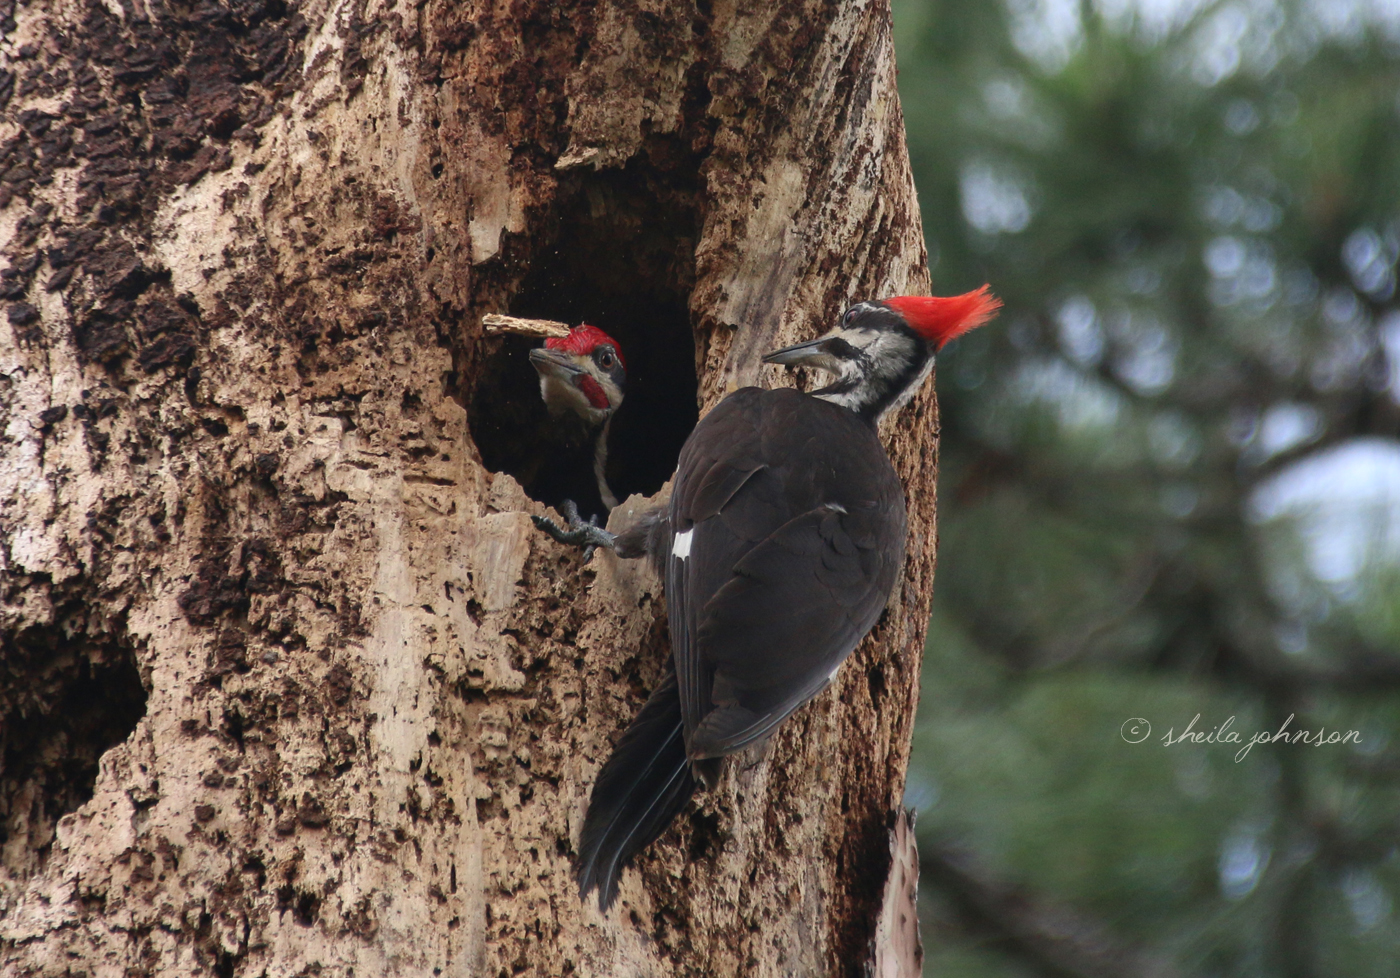 A Female Pileated Woodpecker Gets Out Of Her Mate's Way, As He Throws Wood Chunks Out Of The Nest He's Building.